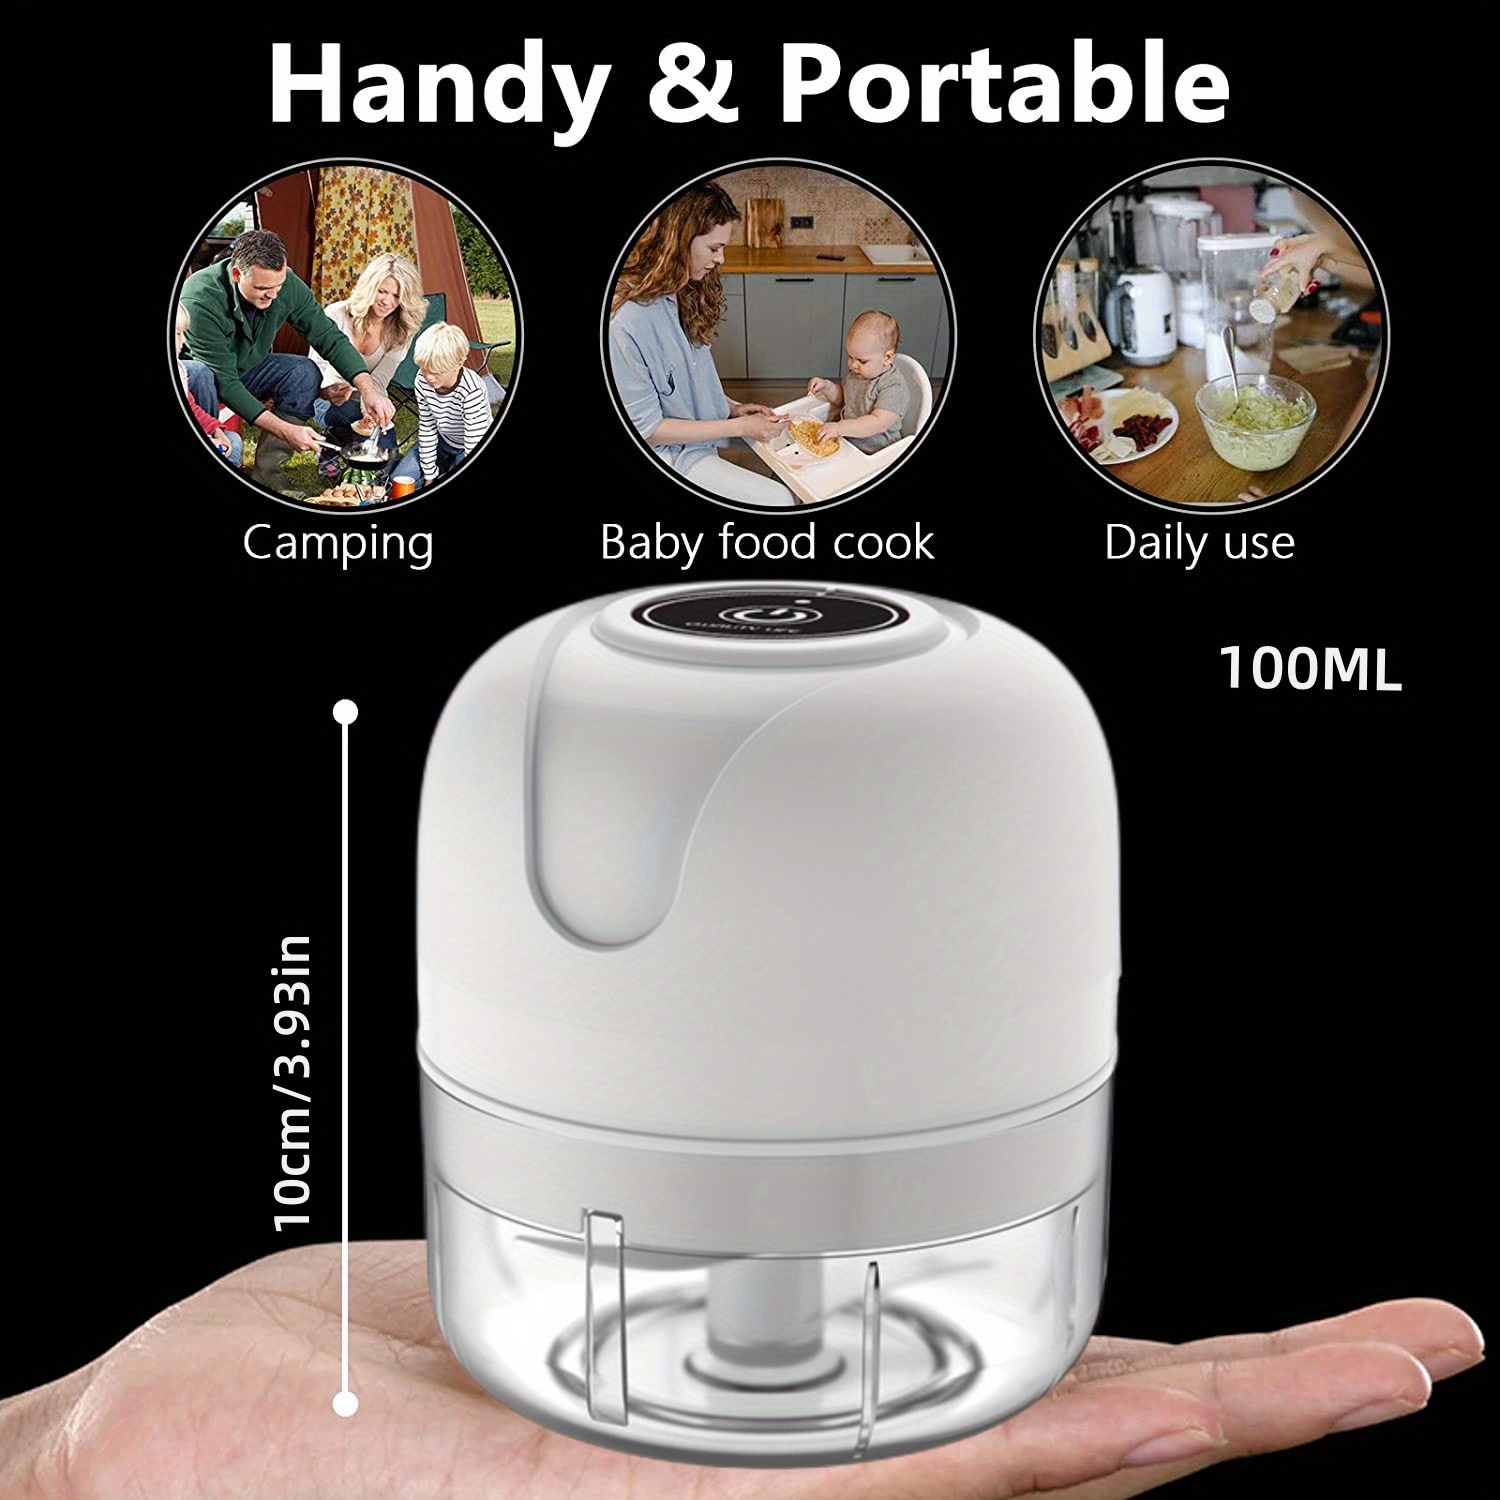 Wireless Electric Mini Garlic Chopper, Small Food Processor USB Charging  with 2 Cup (250ML & 100ML), Portable Garlic Slicer Masher Blender for  Ginger, Vegetables, Onion, Nuts, Pepper, Meat, Baby Food 